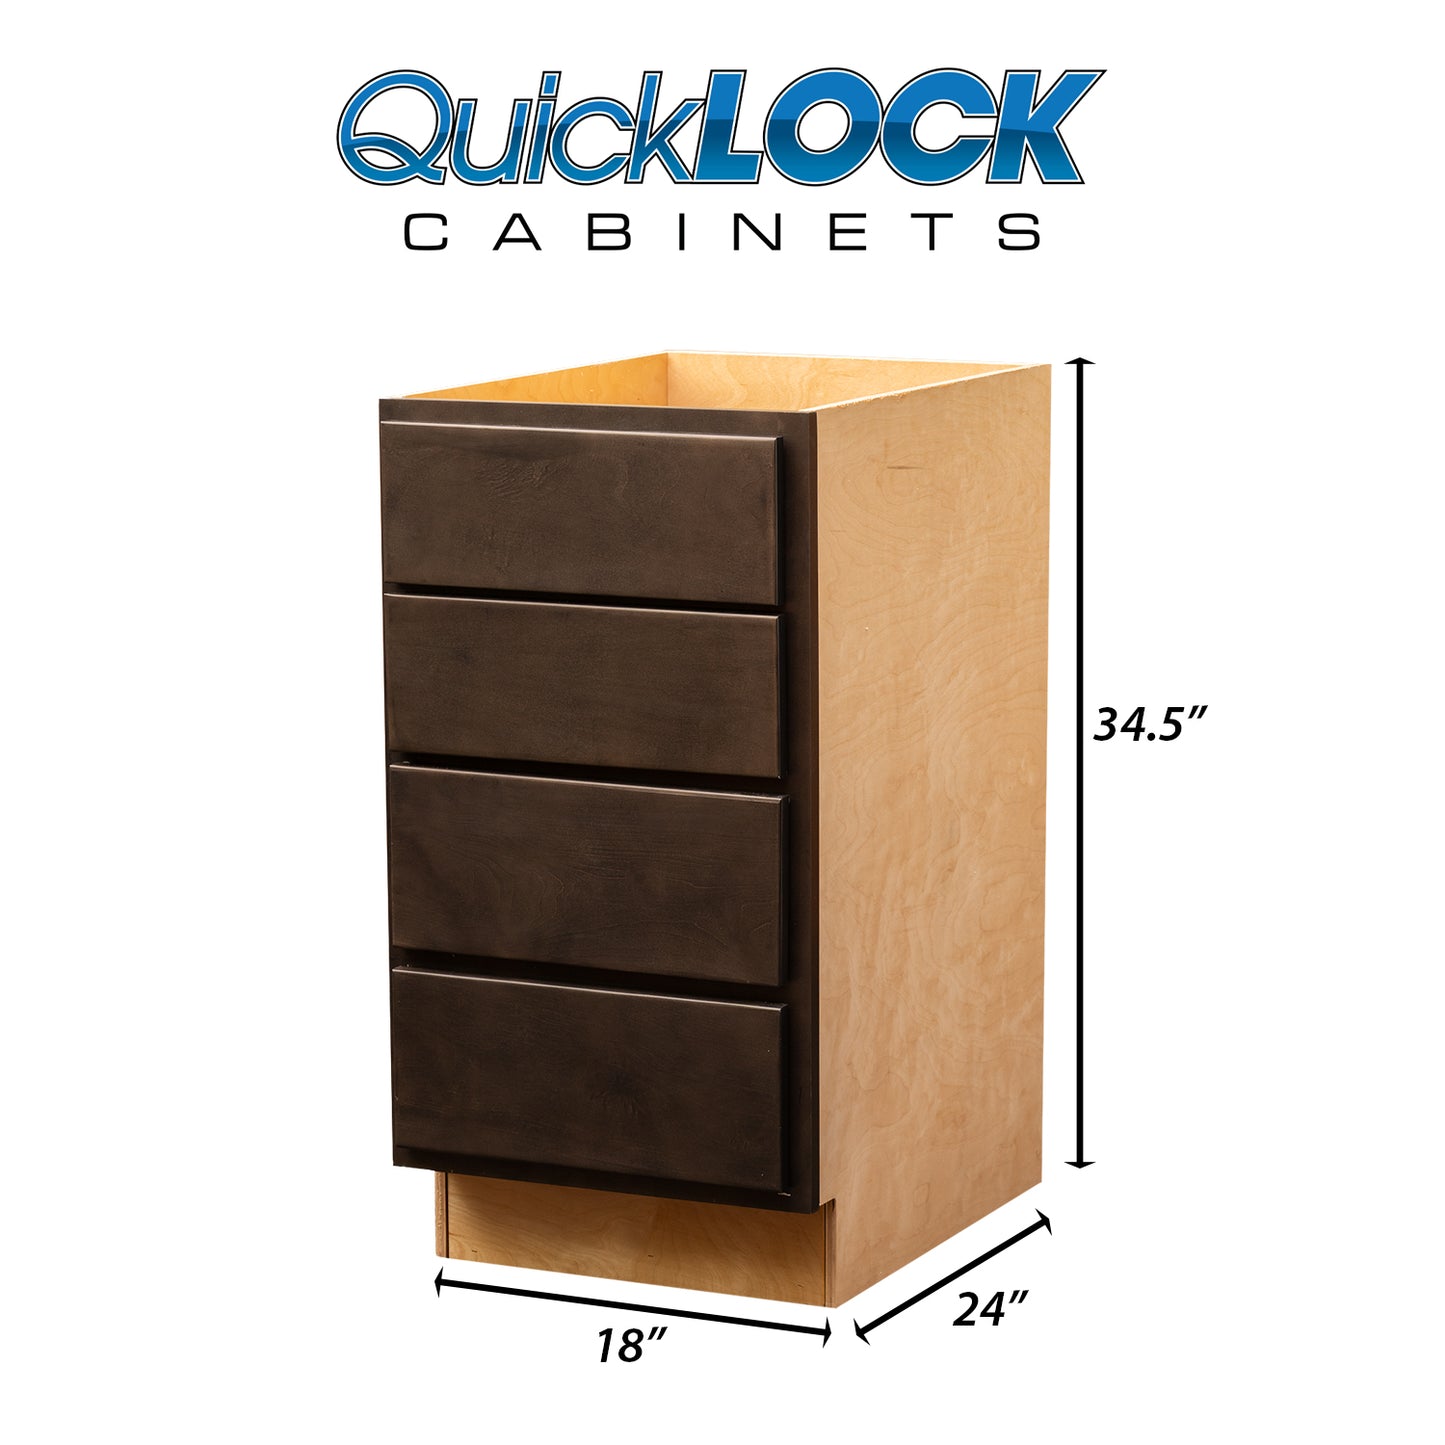 Quicklock RTA (Ready-to-Assemble) Espresso Stain 4 Drawer Base Cabinet